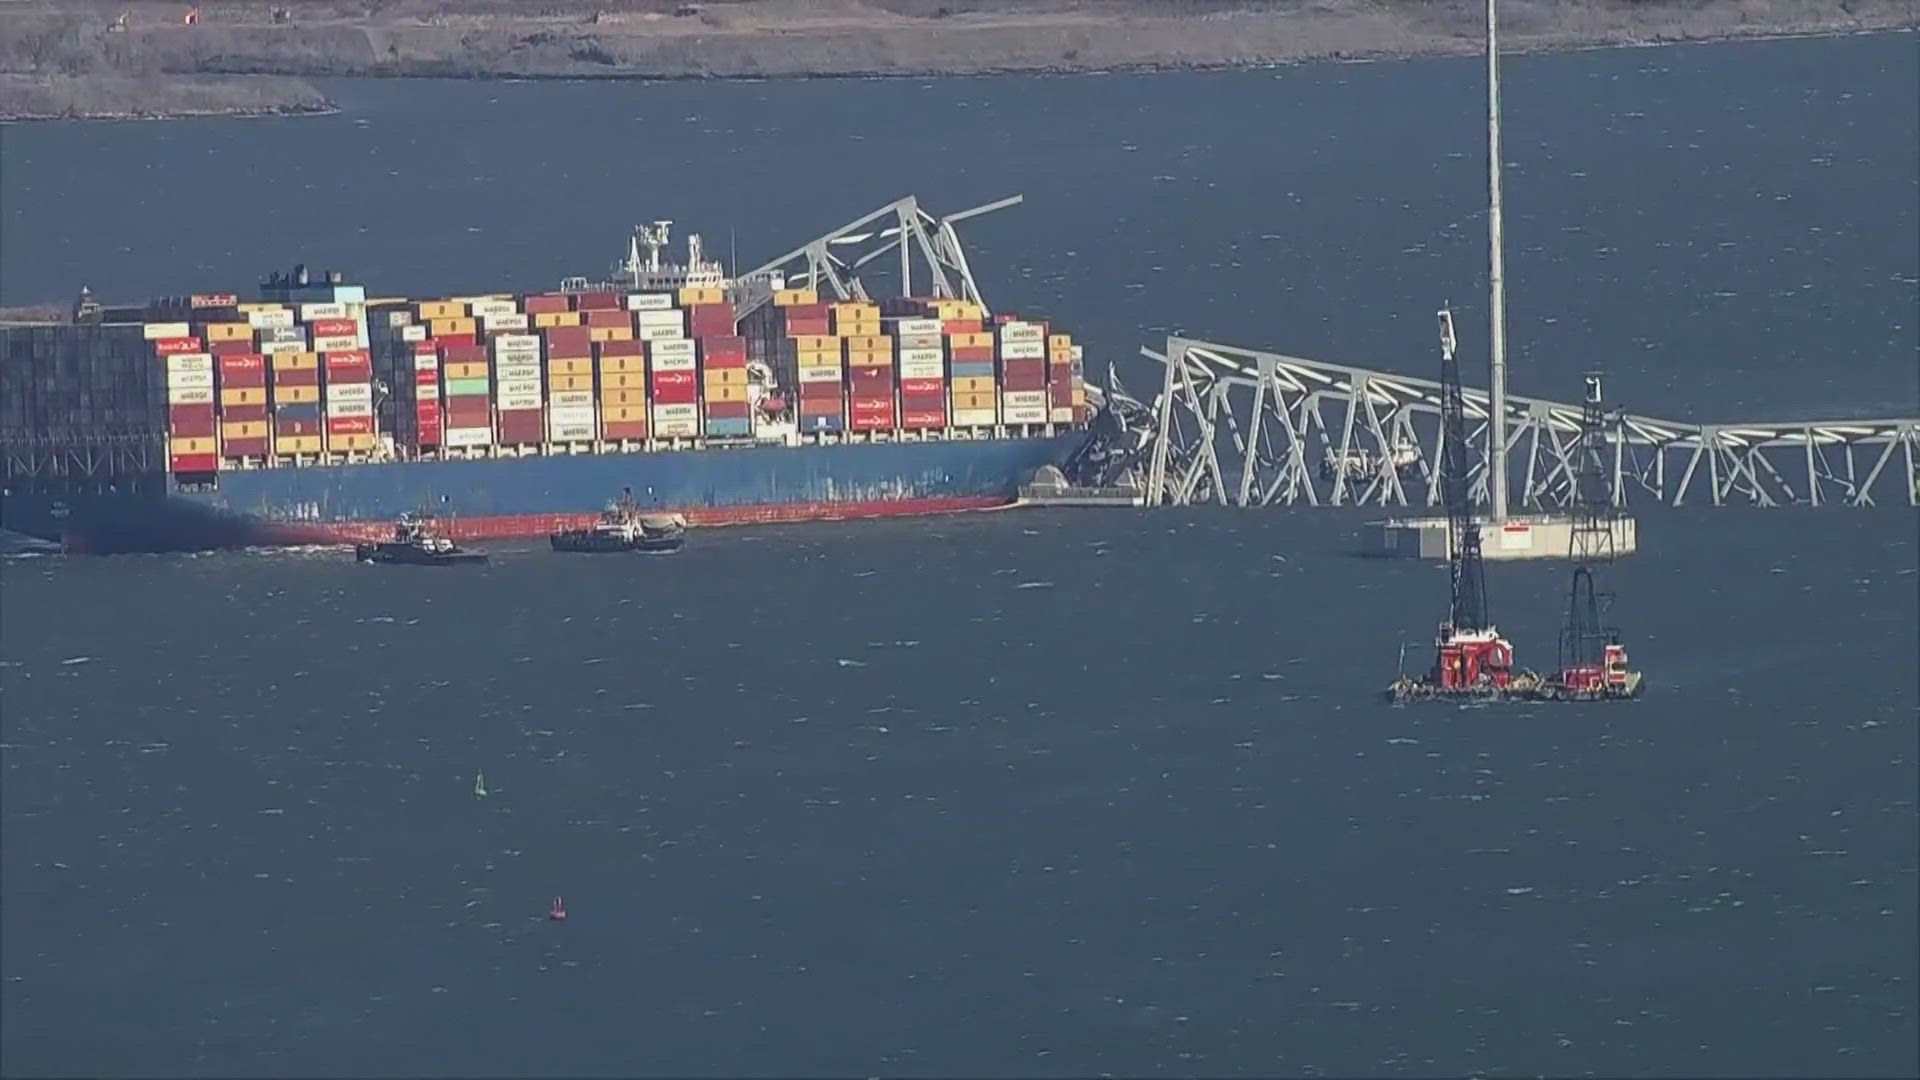 Thousands of longshoremen, truckers and small business owners have seen their jobs impacted by the collapse, making reopening the port a priority.